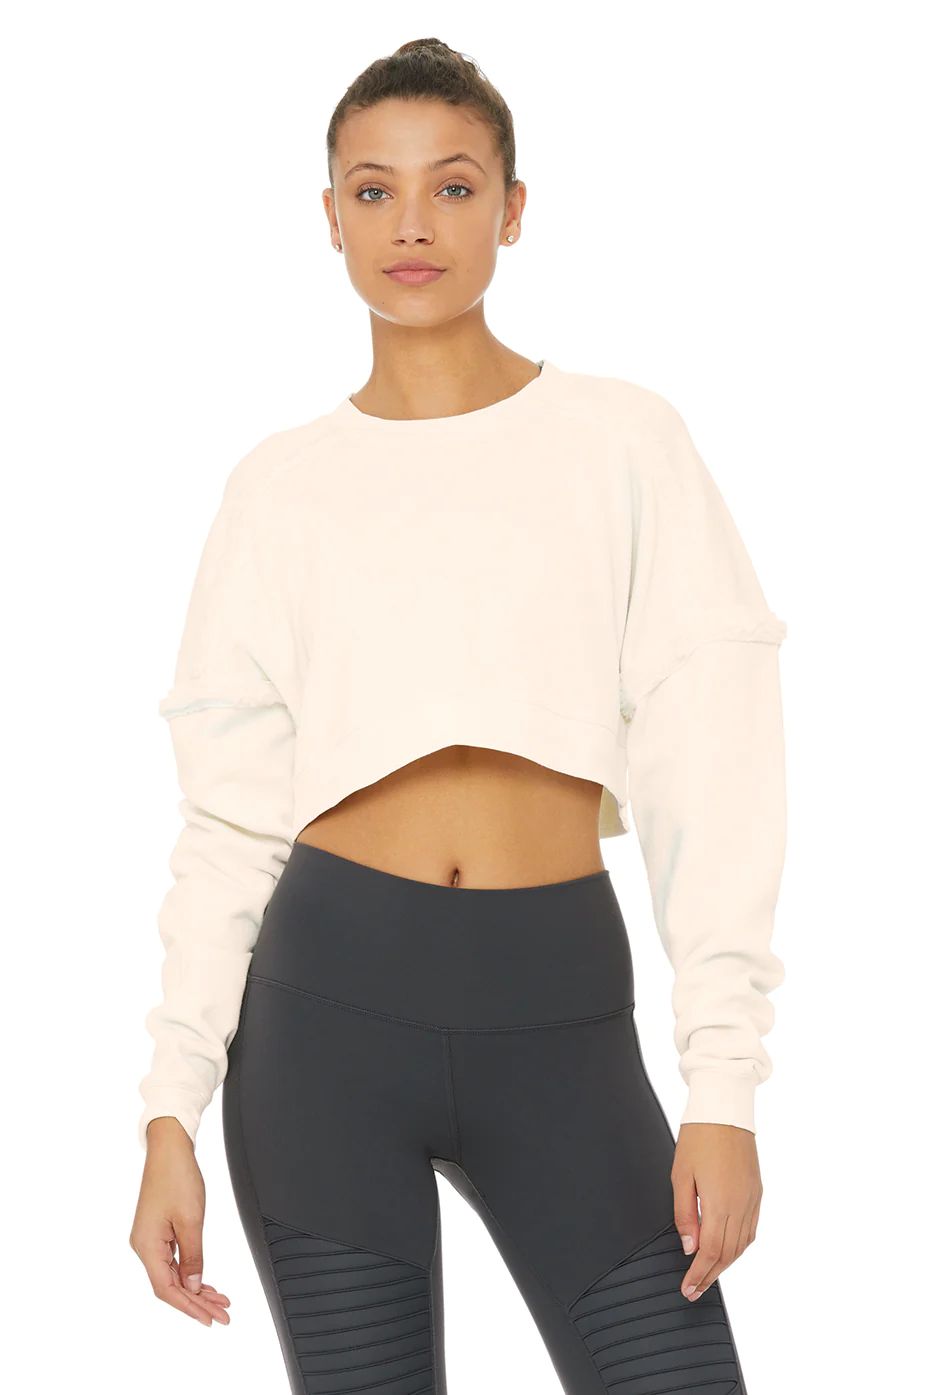 City Long Sleeve Top in Pristine, Size: Large | Alo YogaÂ® | Alo Yoga